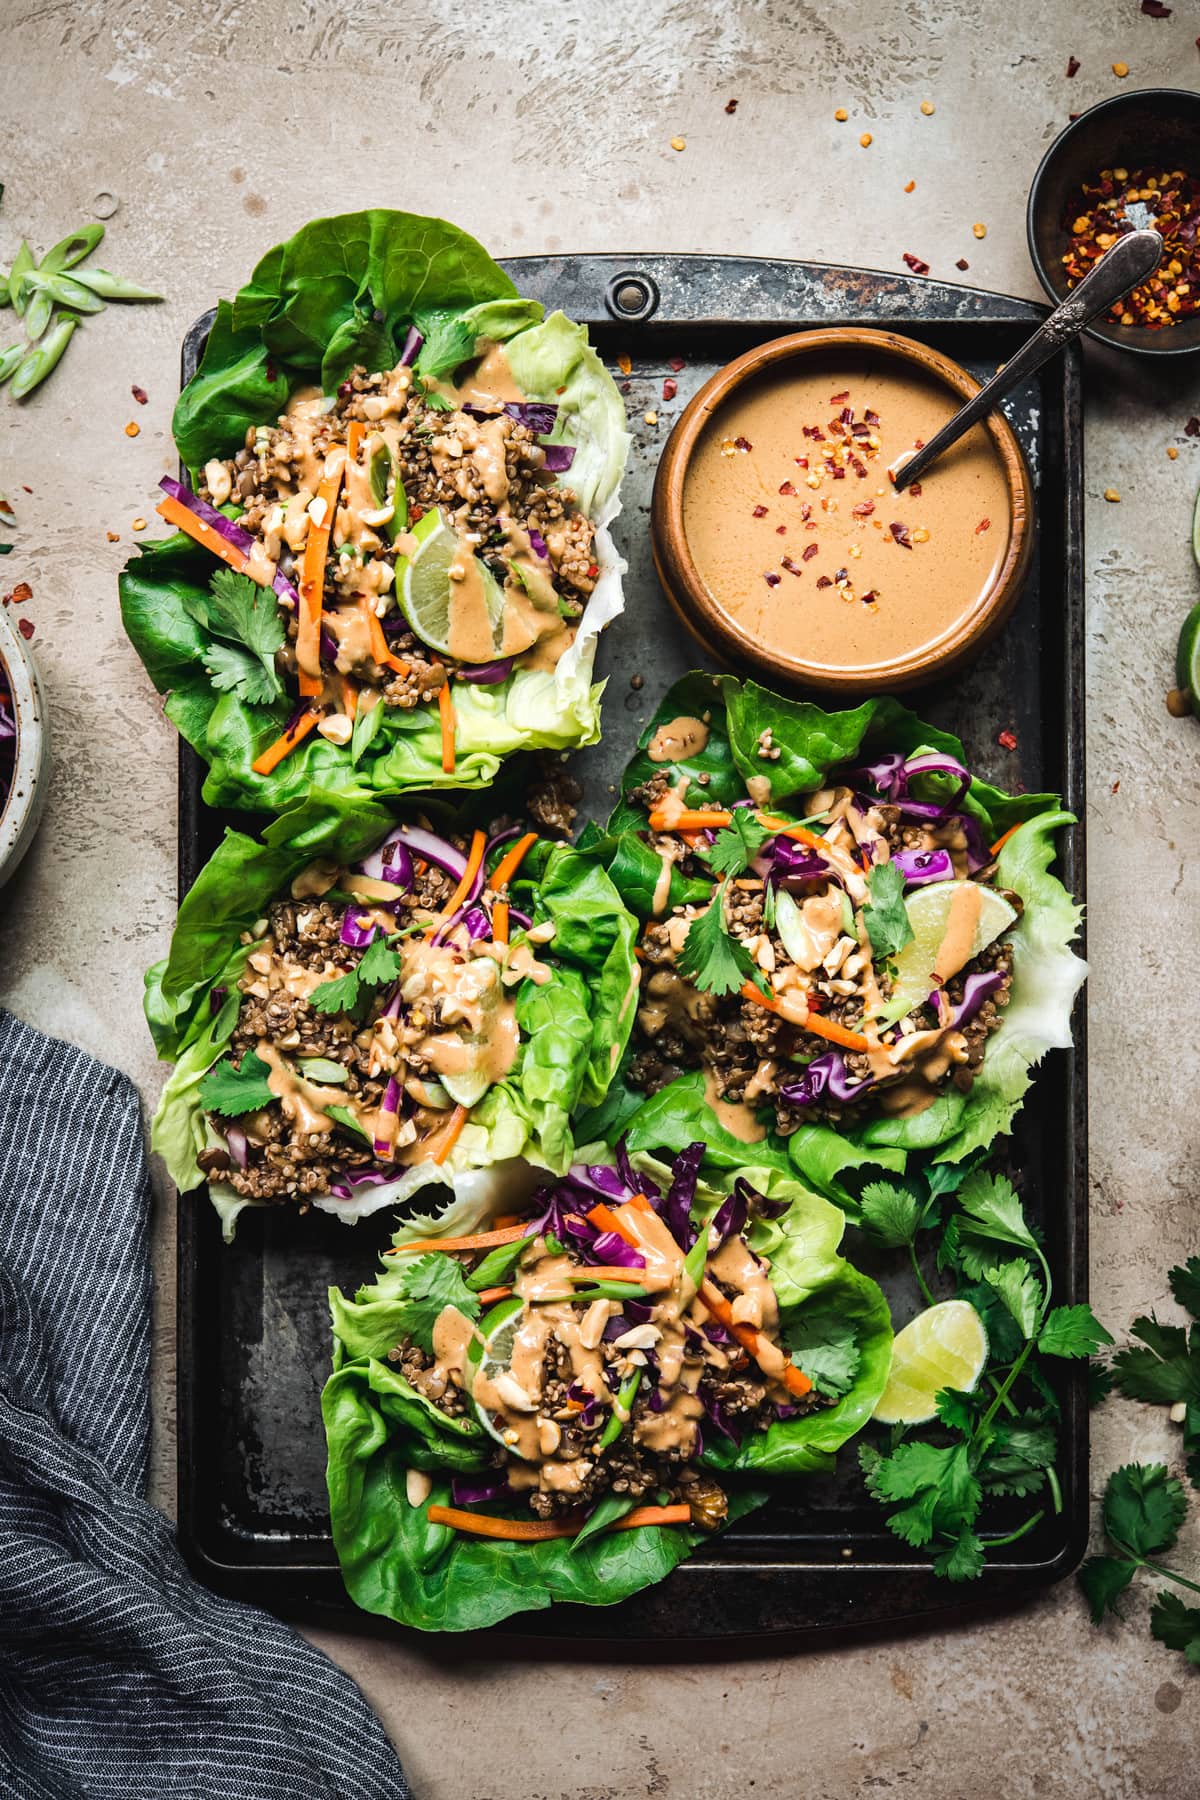 Overhead view of vegan asian lettuce wraps with lentil walnut filling and peanut sauce on antique tray